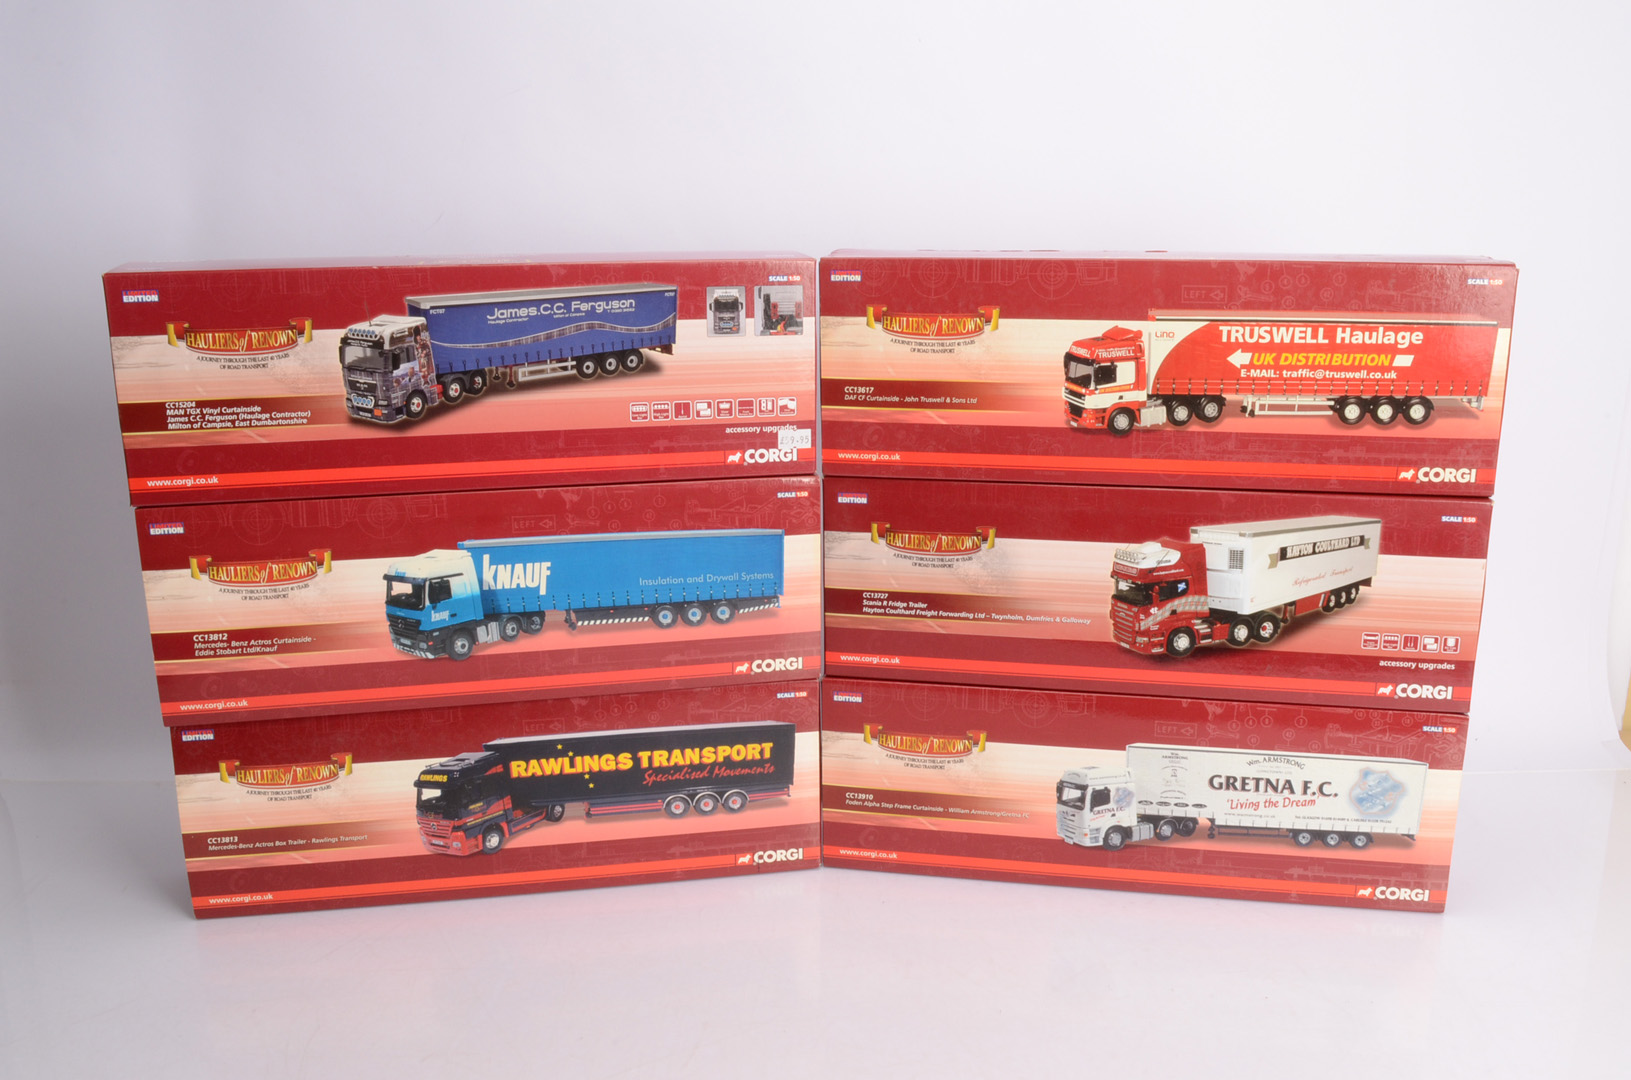 Corgi Diecast 1:50 Scale Articulated Trucks, Hauliers of Renown, all boxed CC13910 Foden Alpha